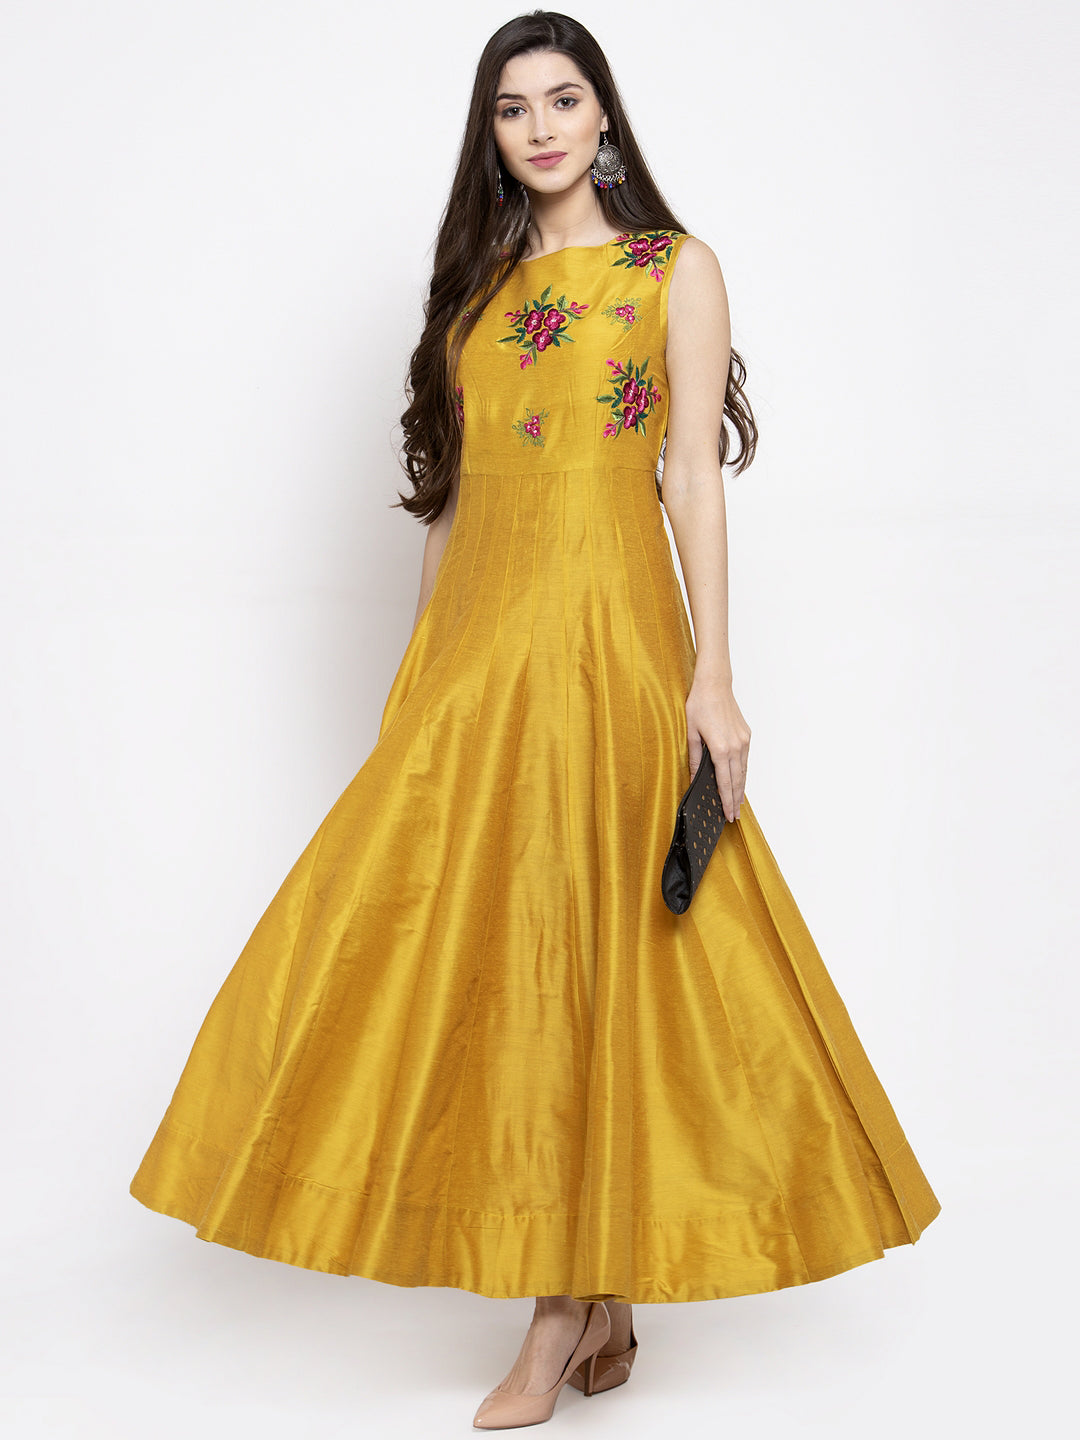 Women's Mustrad Yellow Foral Ethnic Maxi Dress - Final Clearance Sale